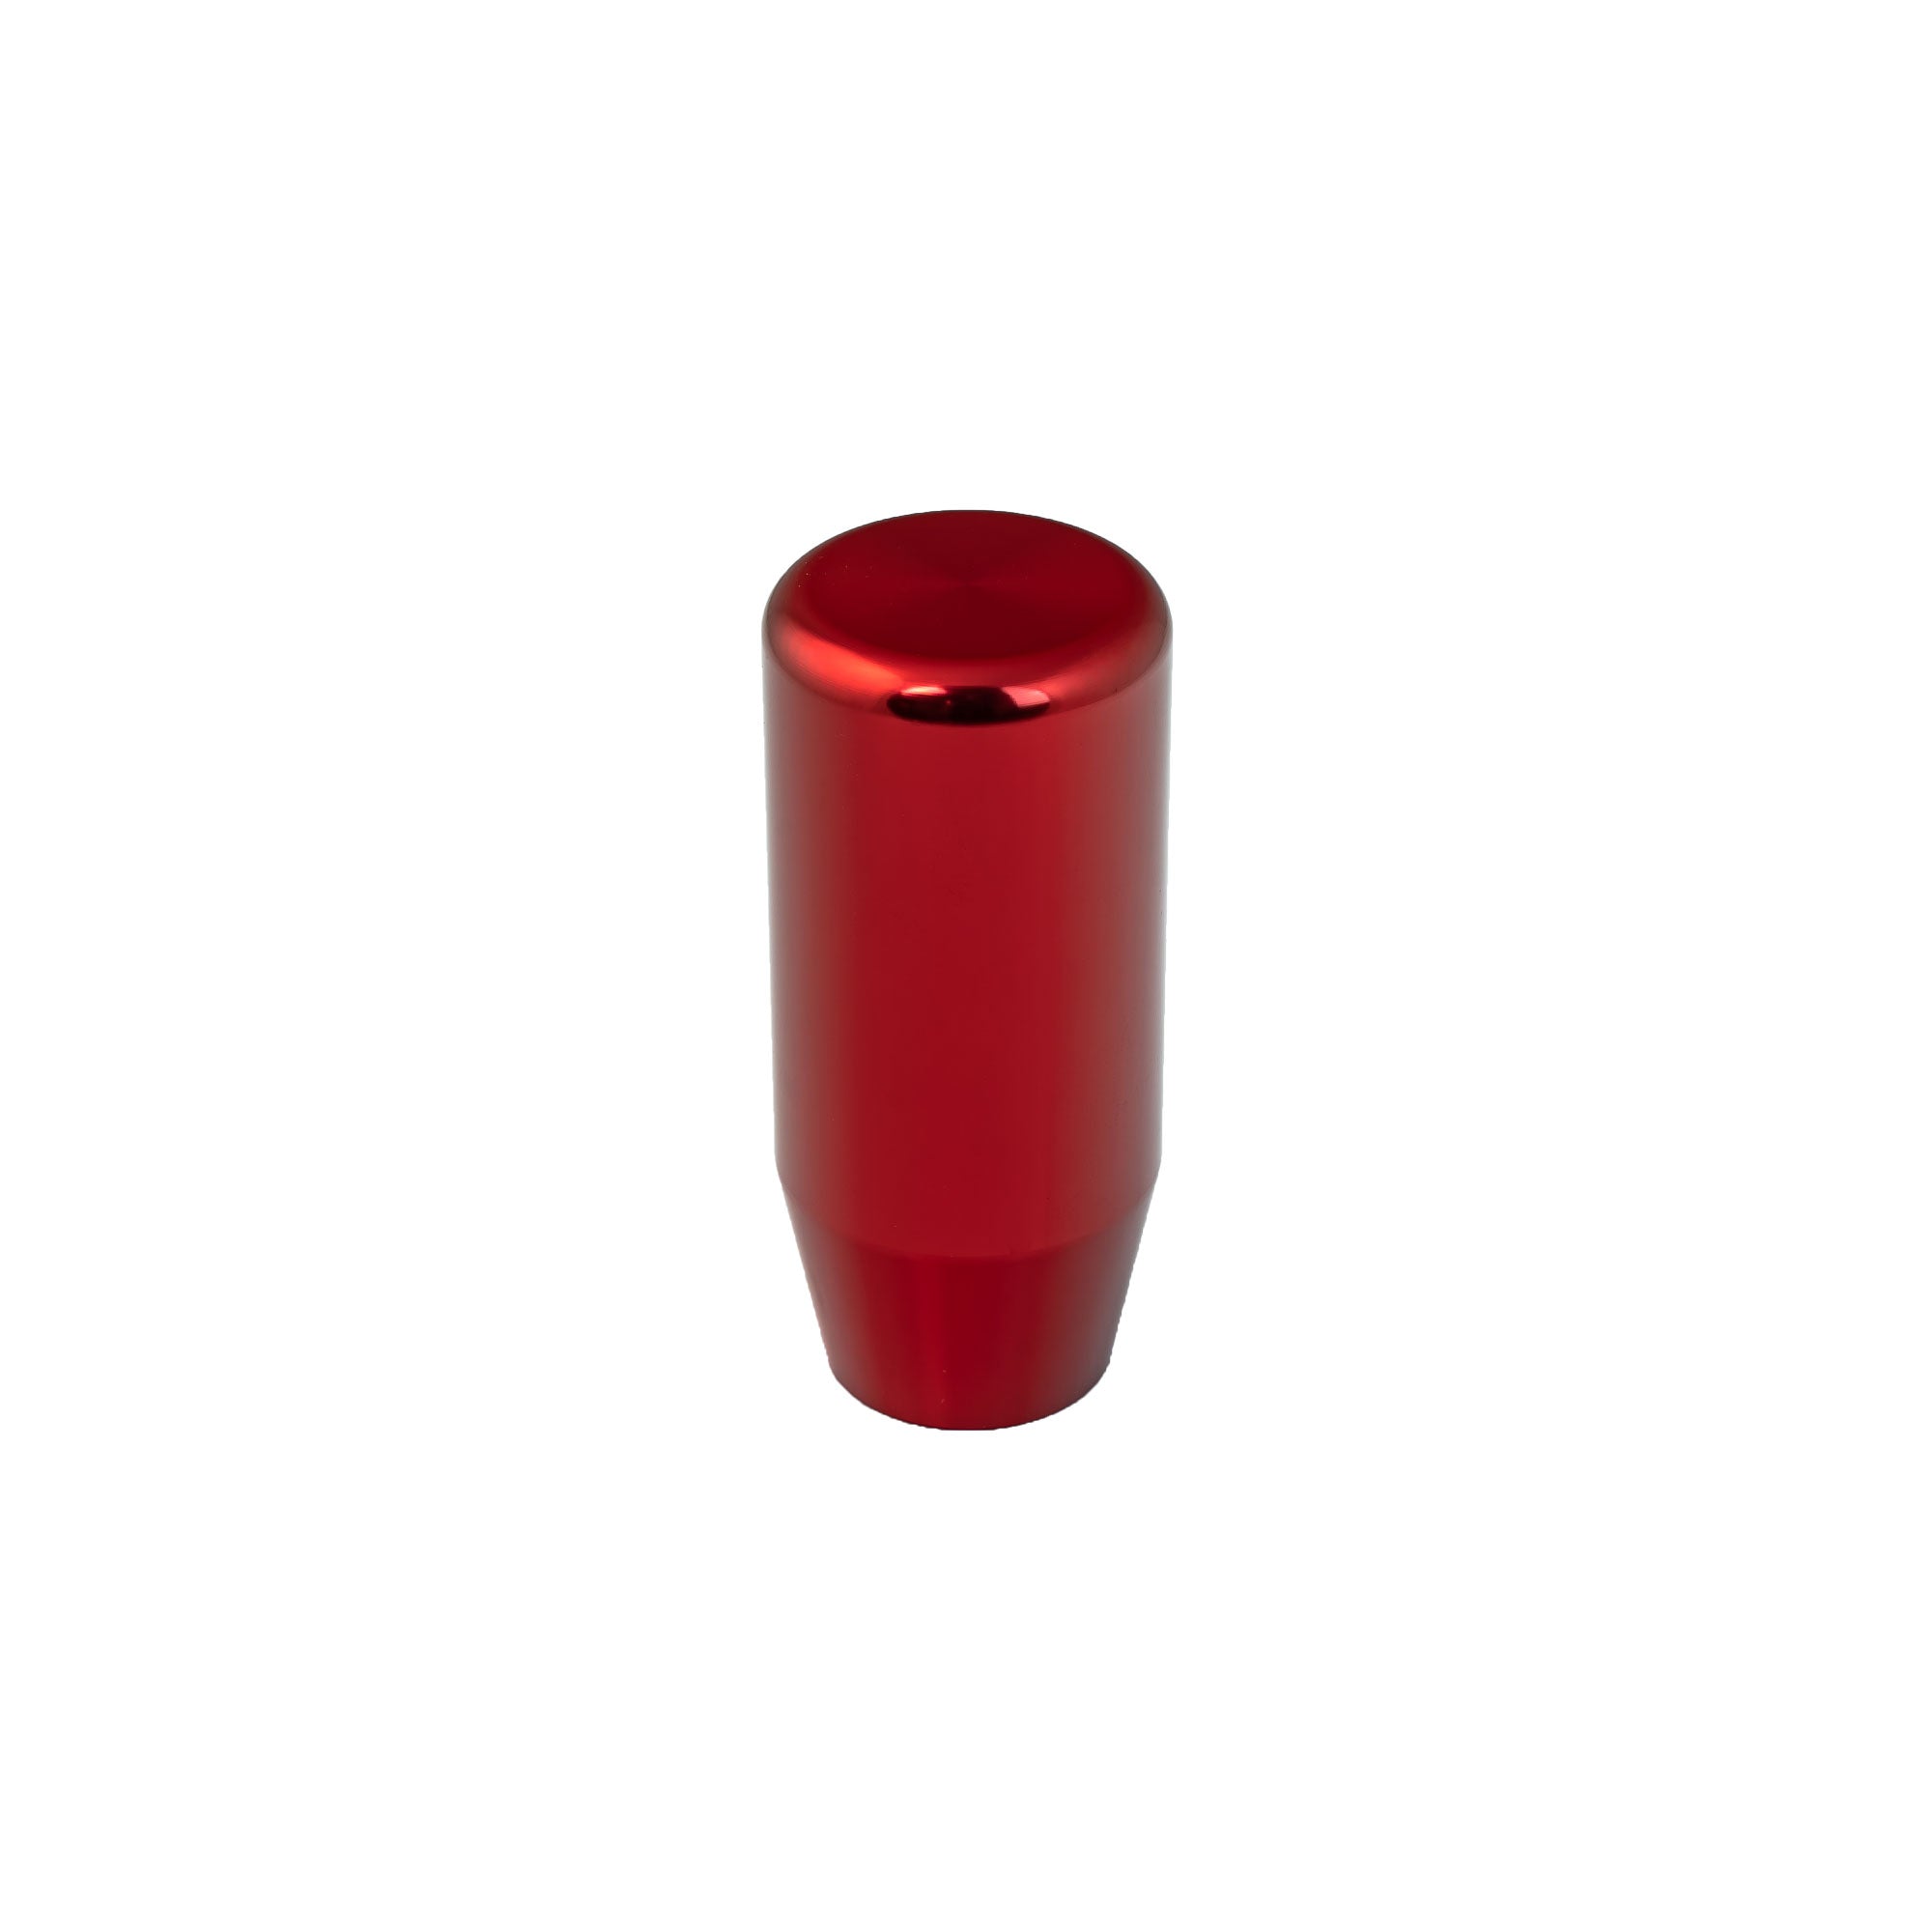 A'PEXi N1 Shift Knob - Time Attack Red [Aluminum]